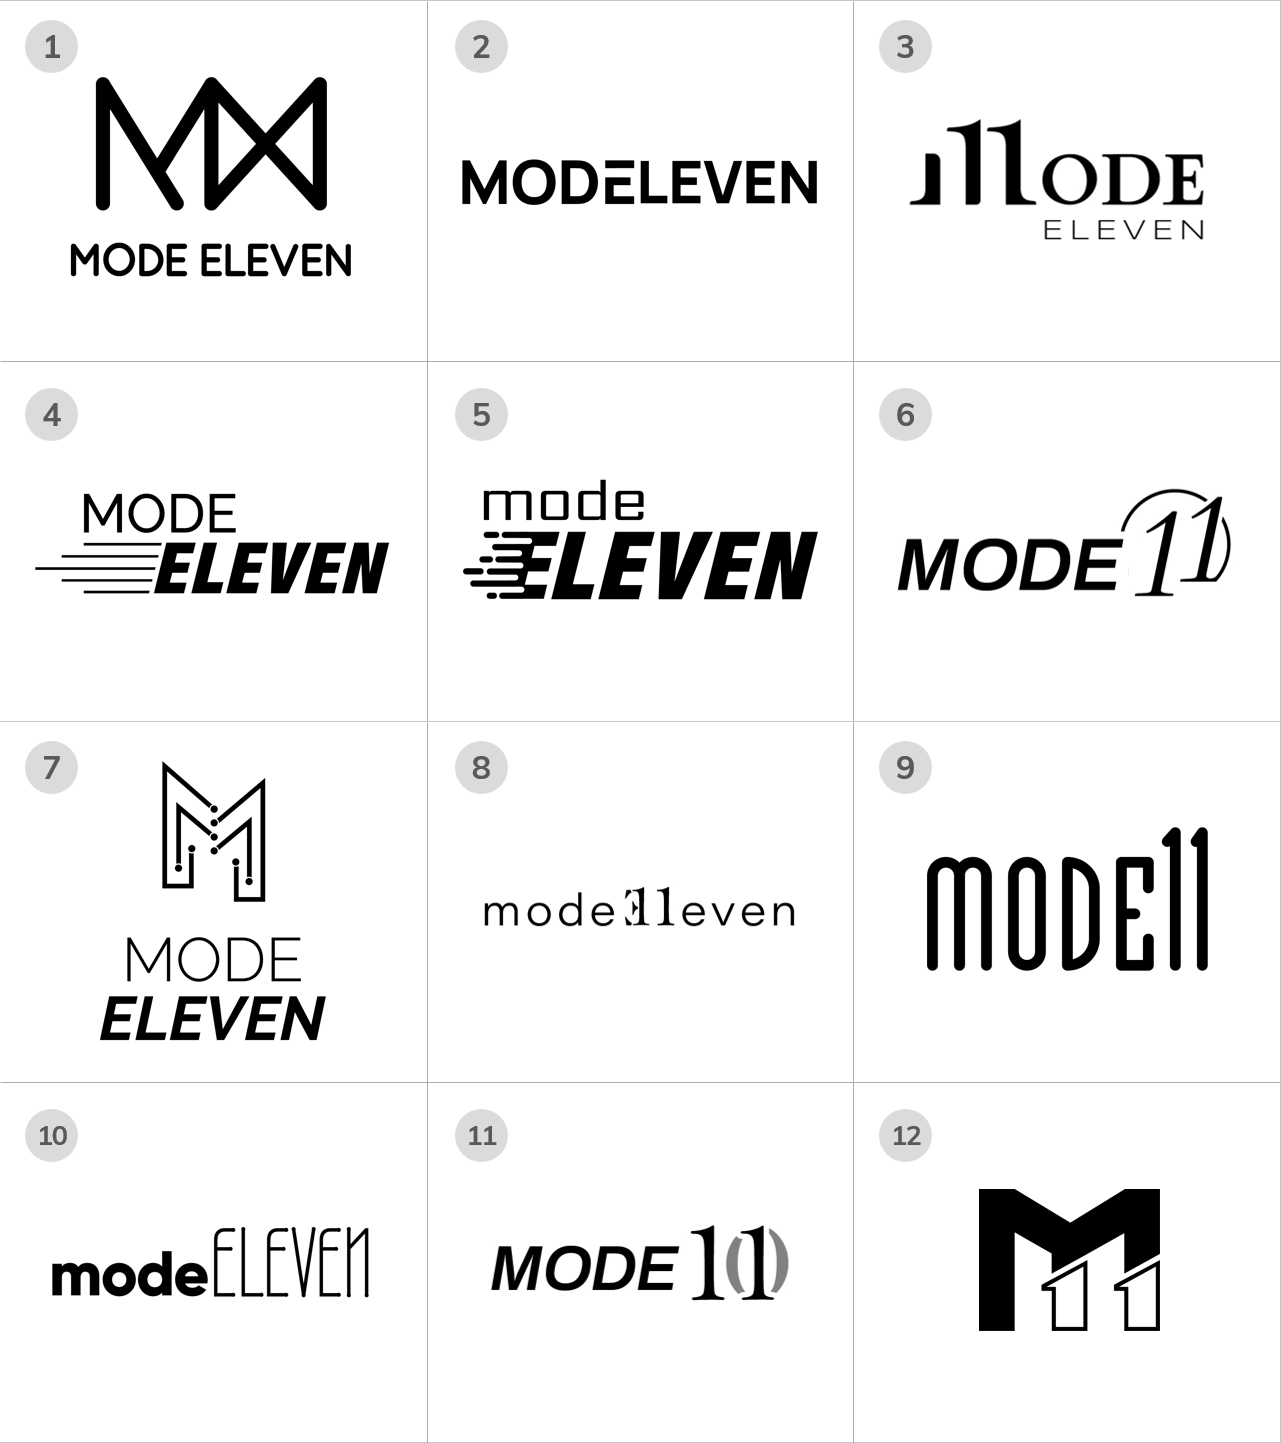 Round 1 of the logo design project; exploring a range of possible ideas in black-and-white, giving the client options for the tone and direction of their logo image